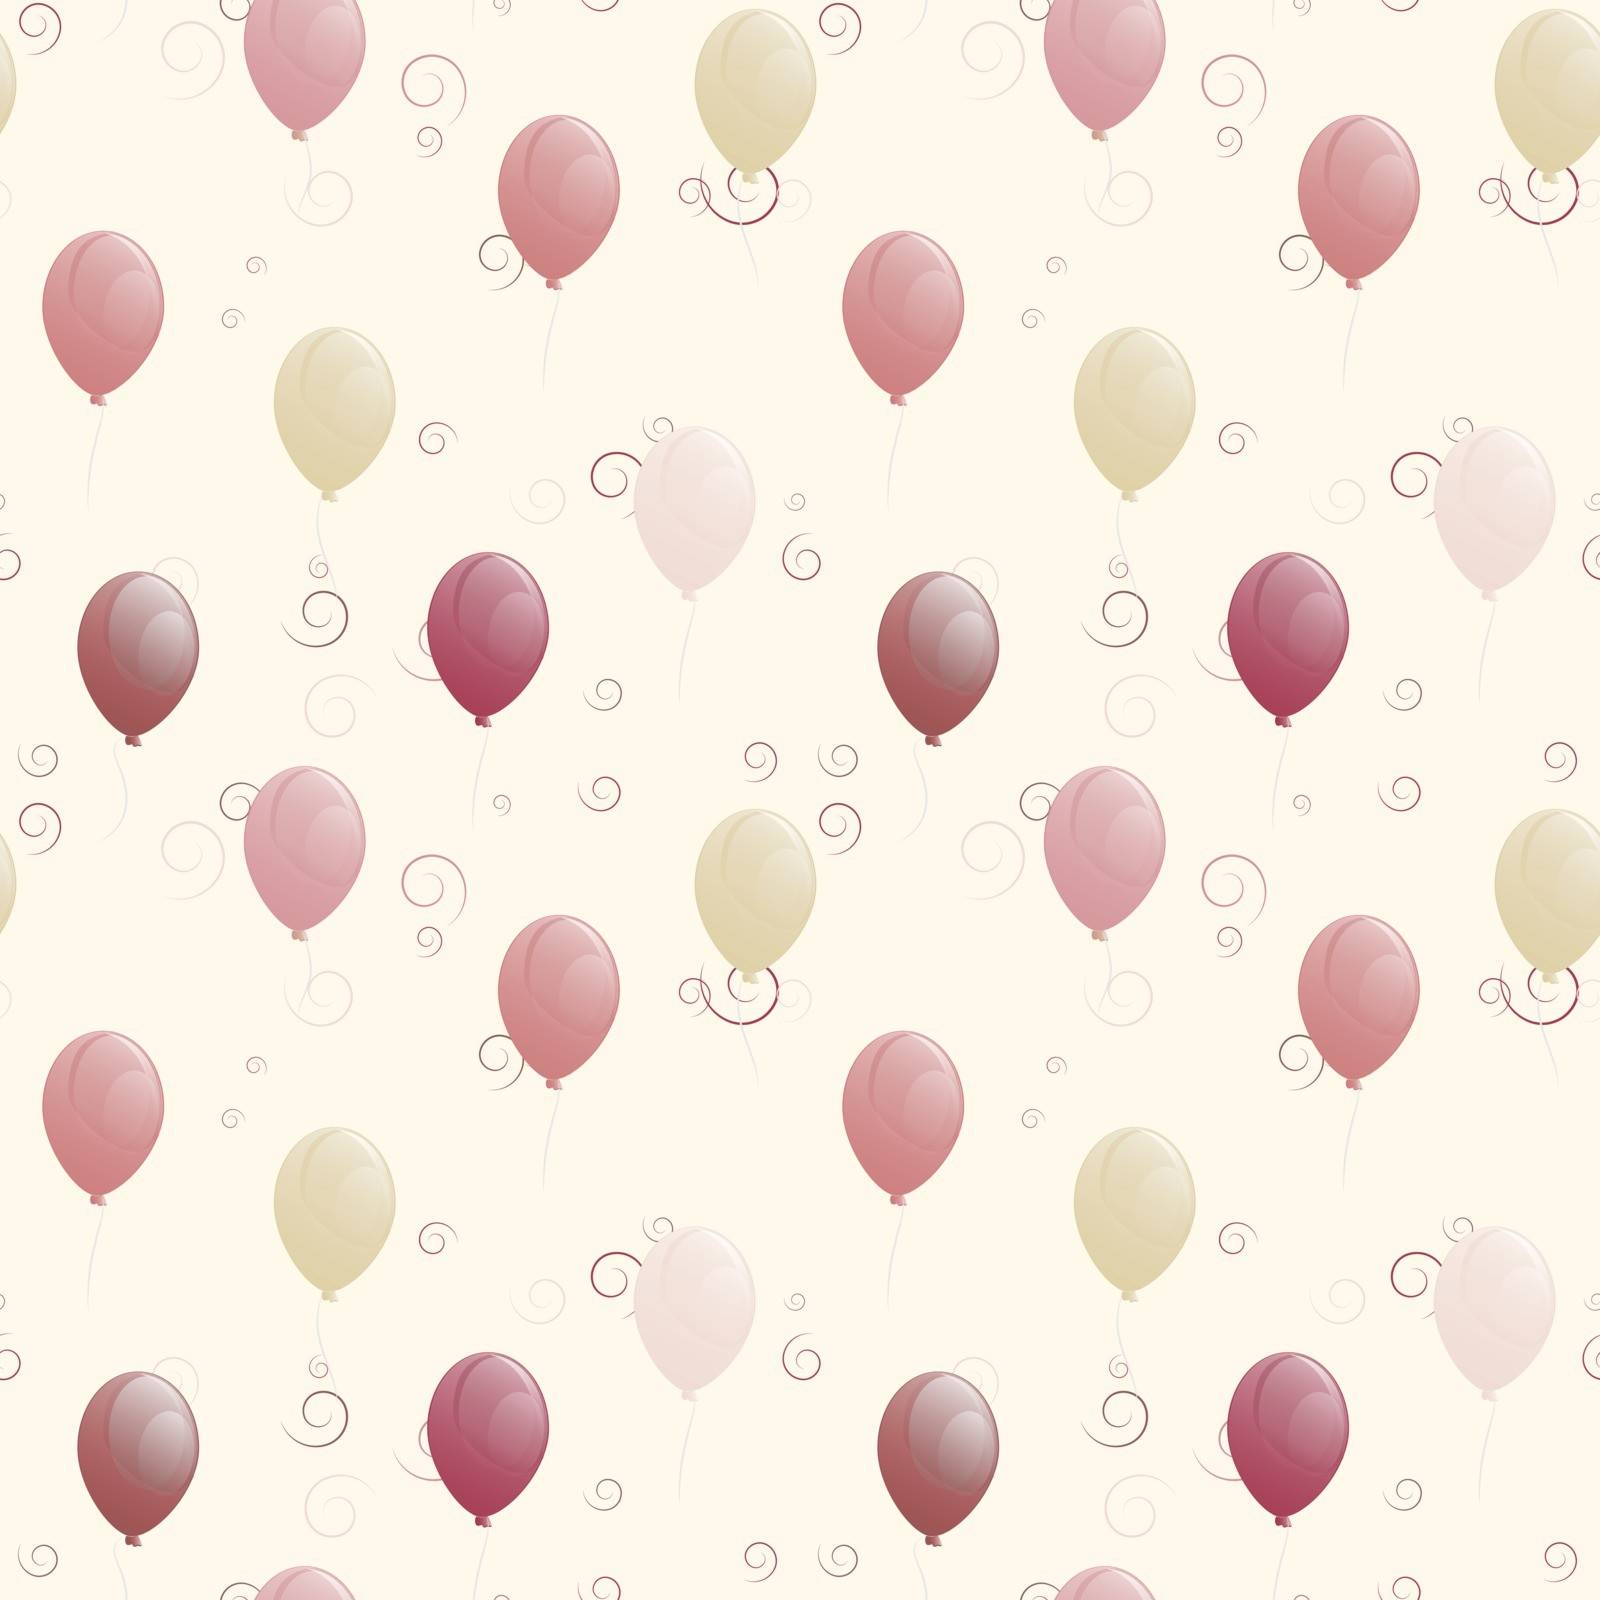 balloons seamless texture. used as fill pattern, backdrop. beige background